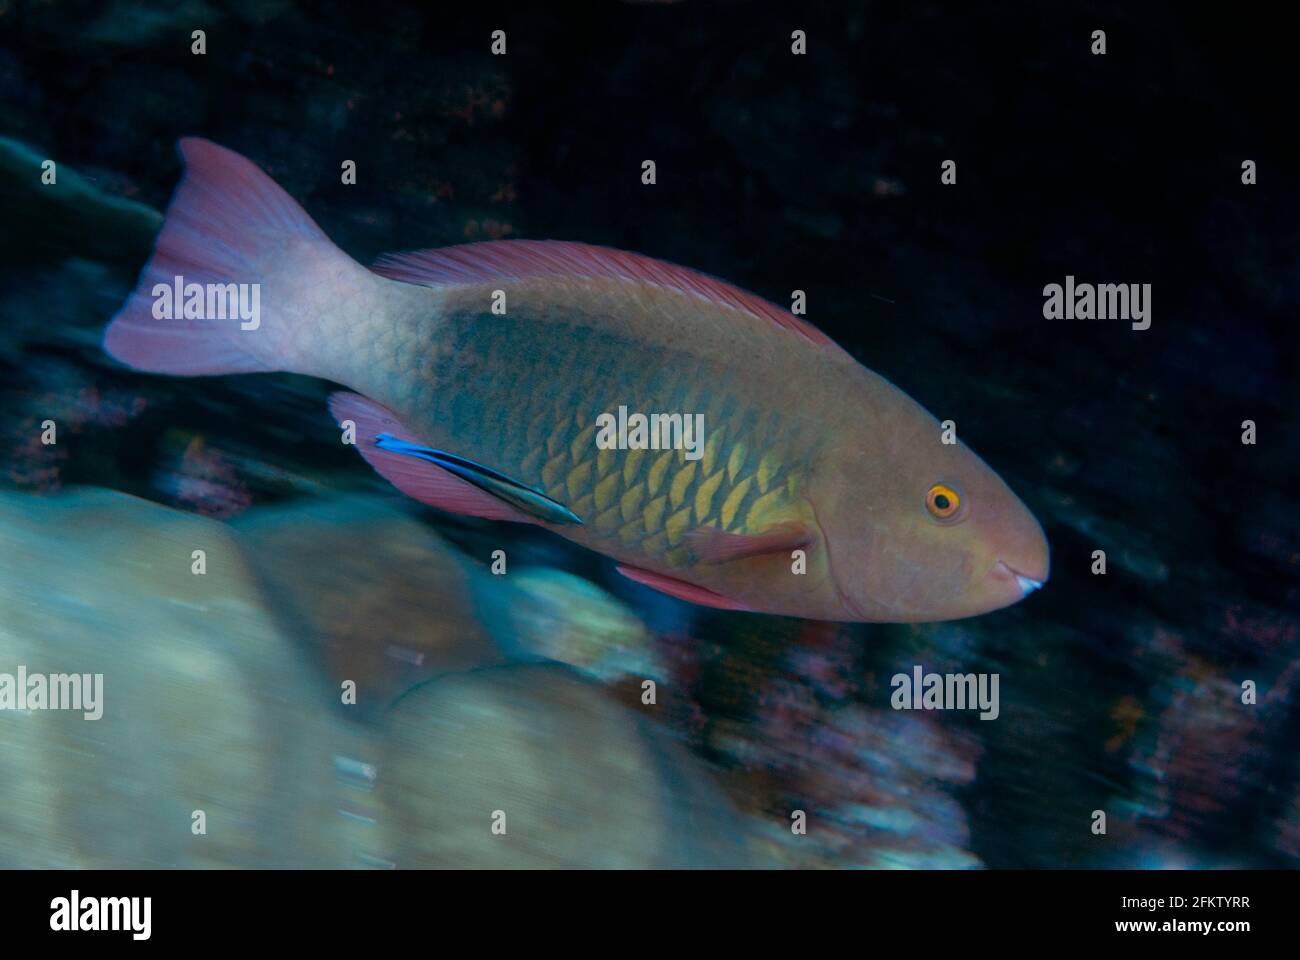 Bridled Parrotfish (Scarus frenatus) being cleaned by a Bluestreak Cleaner Wrasse (Labroides dimidiatus), West White Beach dive site, Christmas Stock Photo